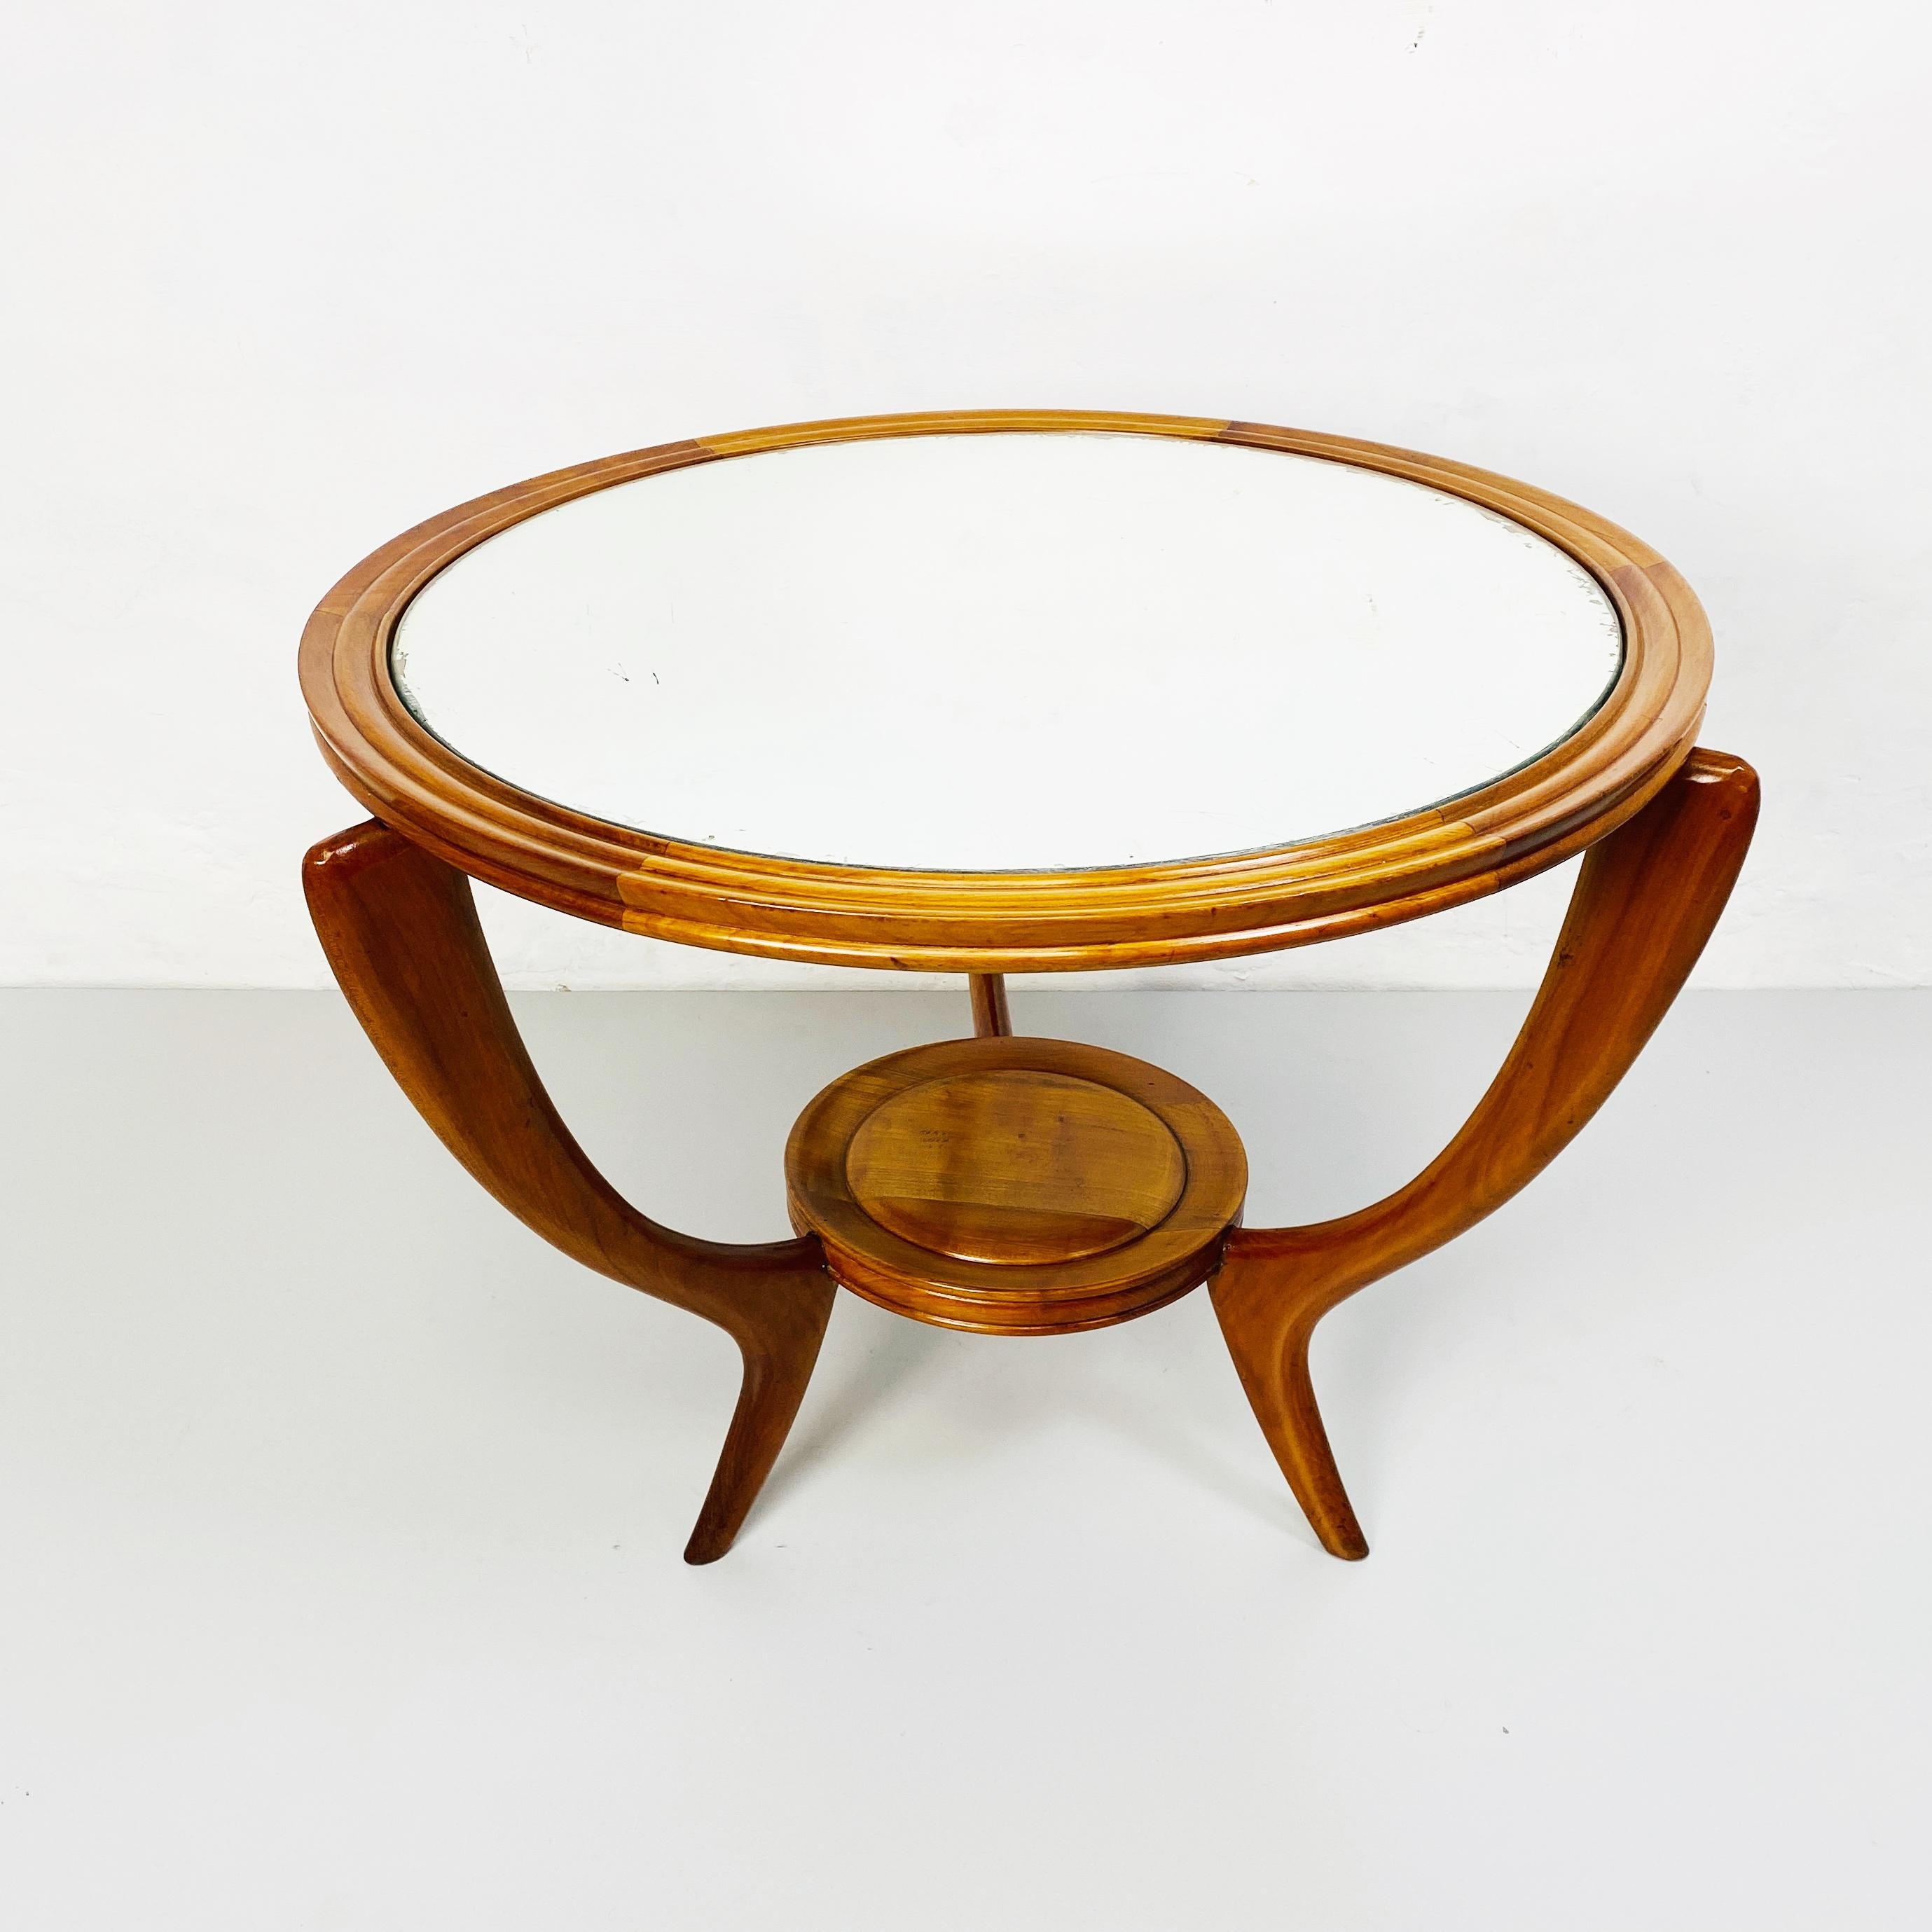 Italian Mid-Century Wood Round Table with Mirror, 1950s For Sale 6